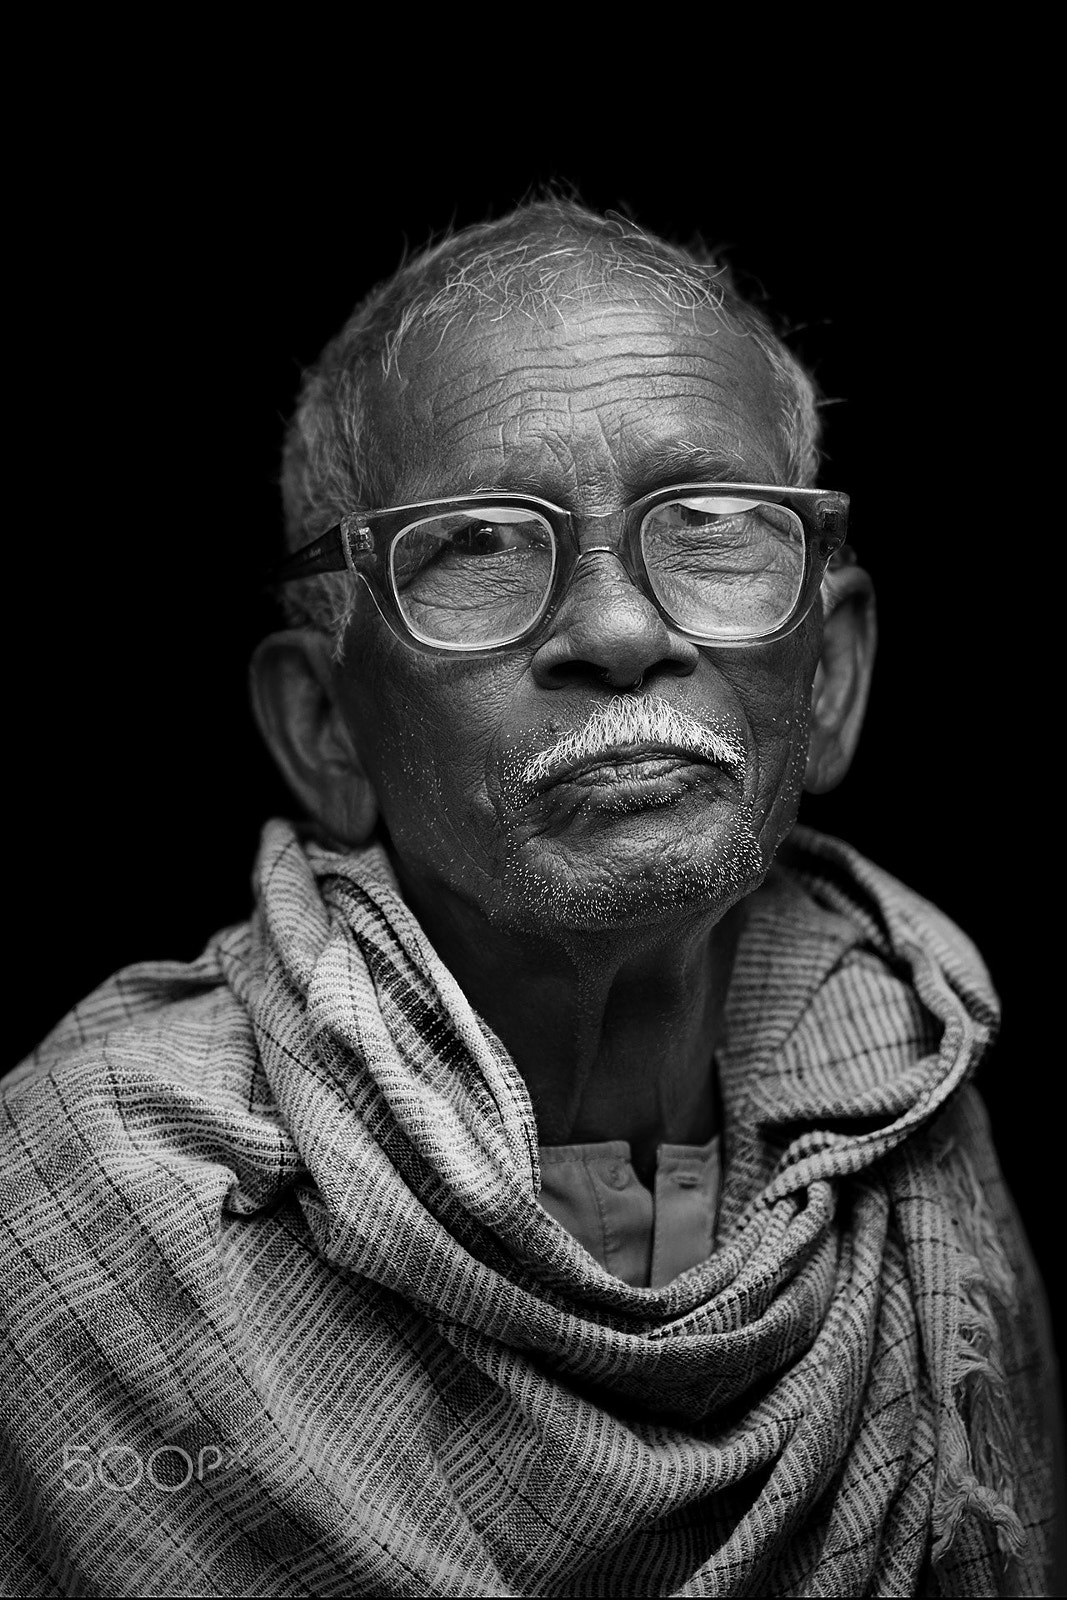 55mm F1.8 ZA sample photo. Old man from dhobi ghat photography